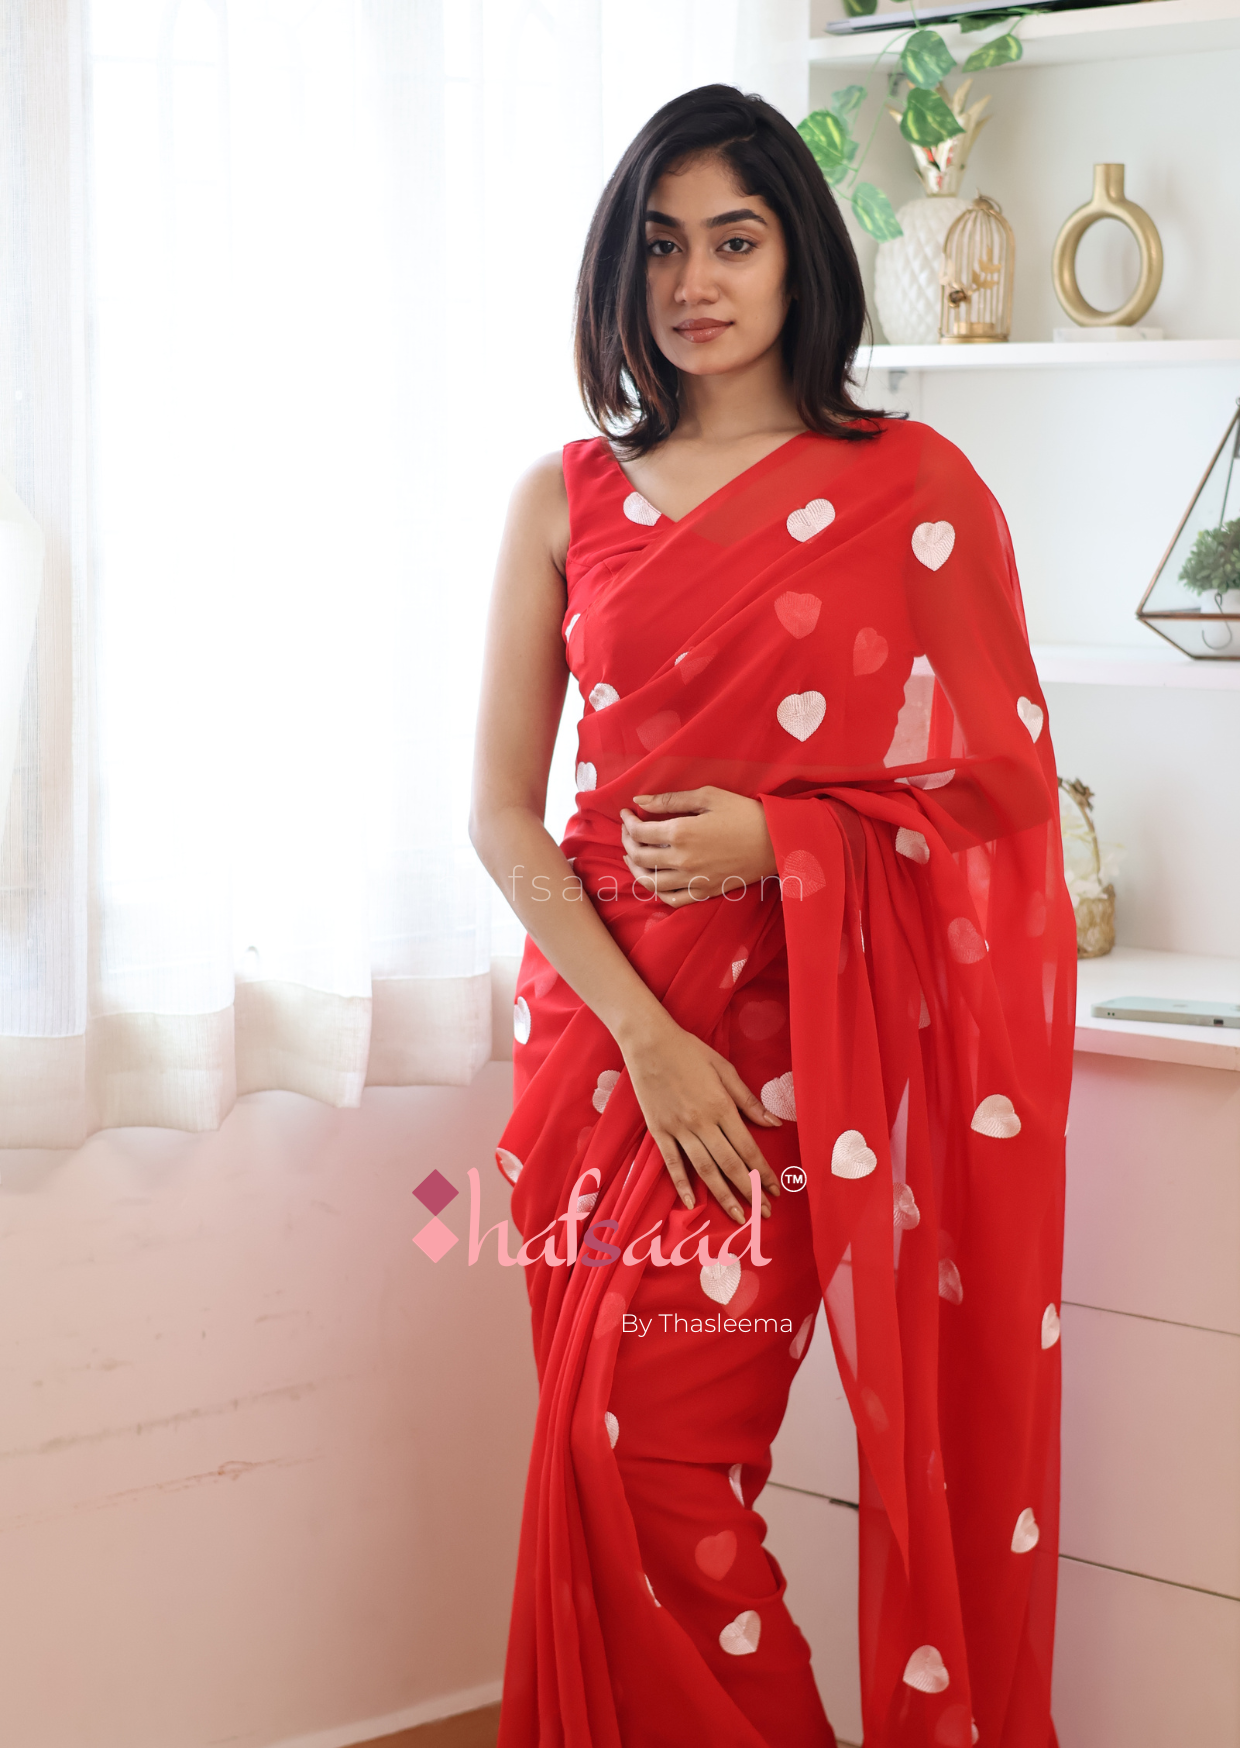 Lil Heart- Ready to wear saree (Red)